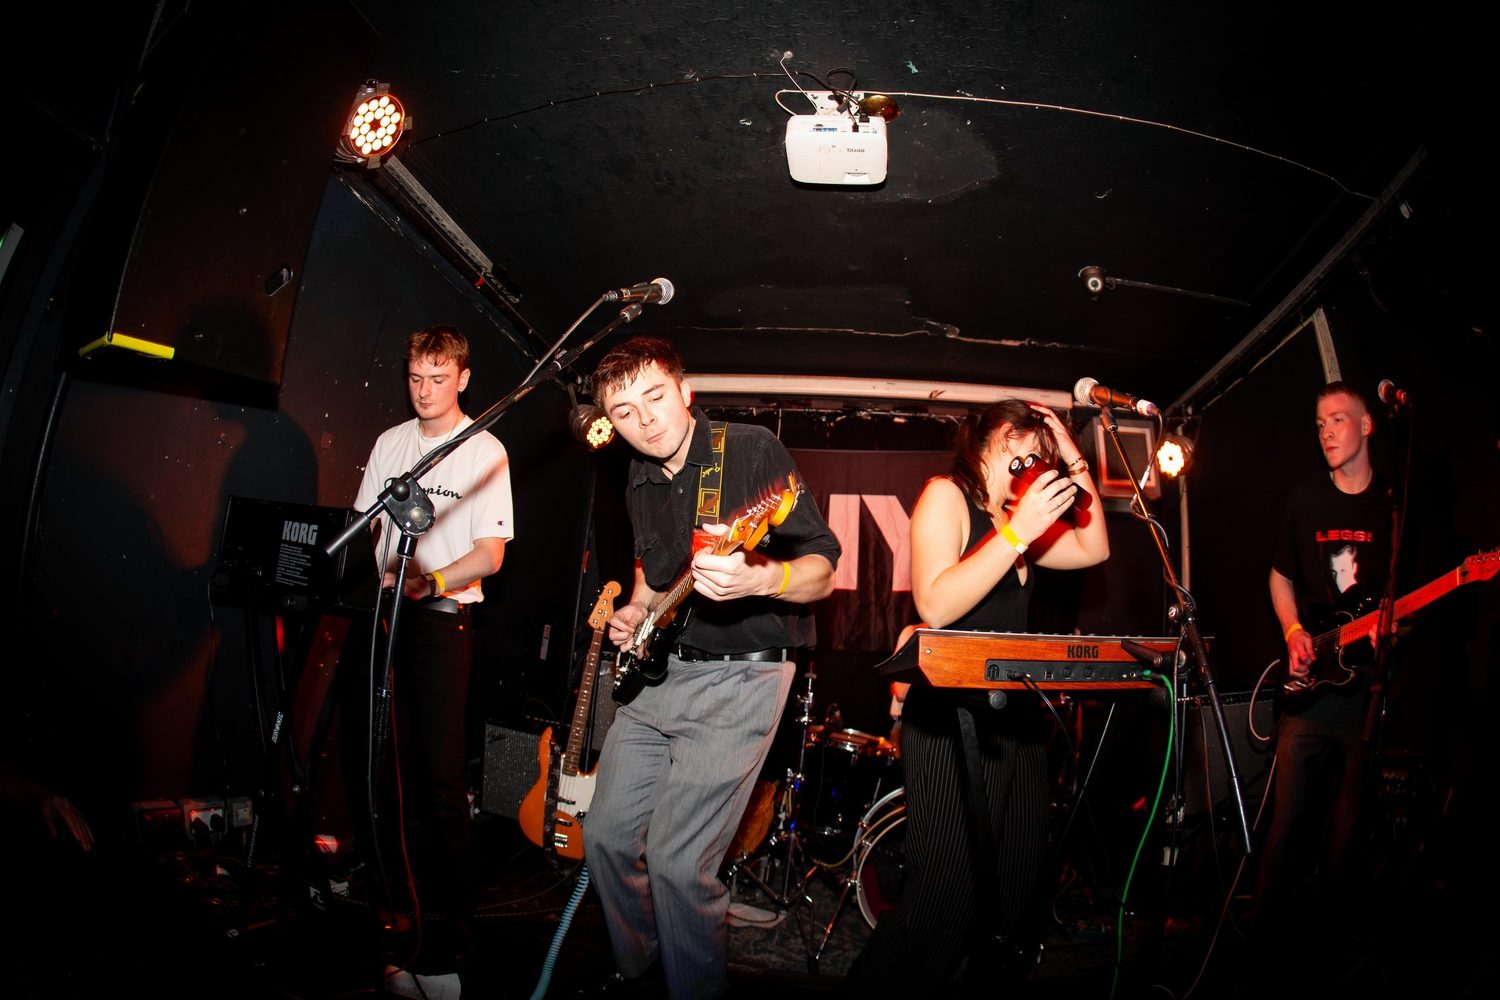 Home Counties, Cosmorat and more ramp up the energy for Night Three of DIY’s Hello 2024 series